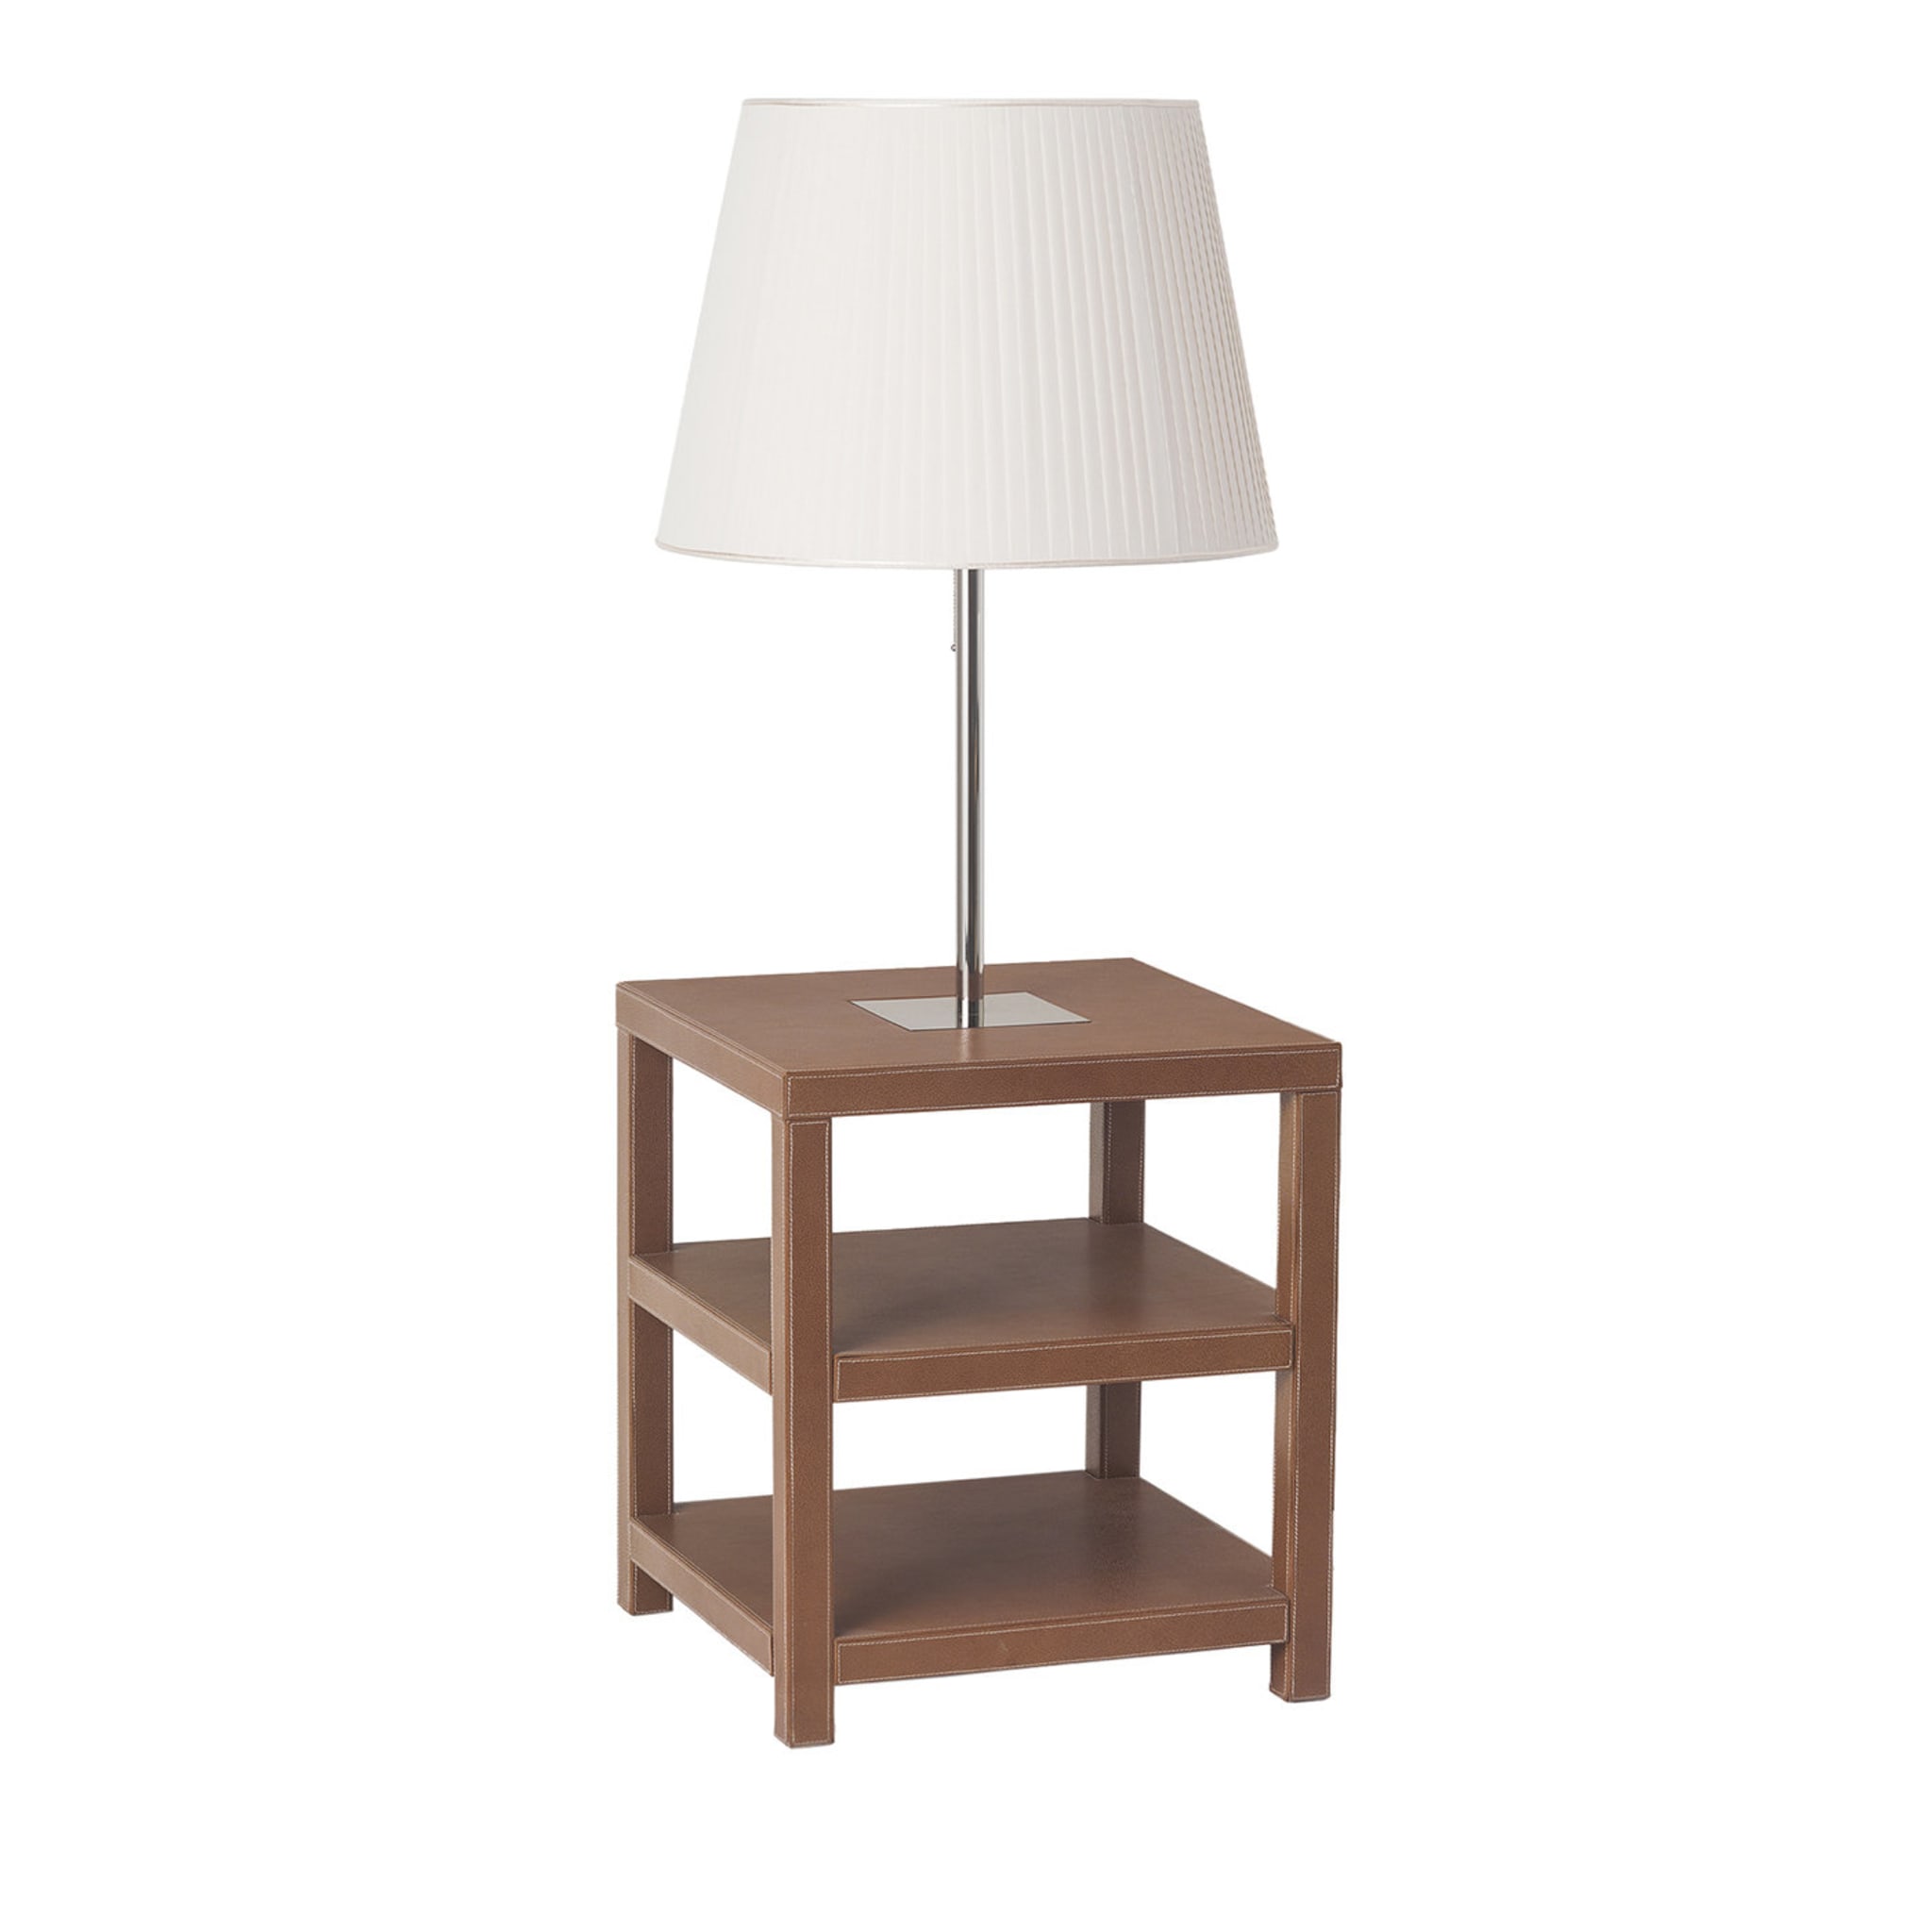 Leather Bedside Table with Lamp by Michele Bonan - Main view